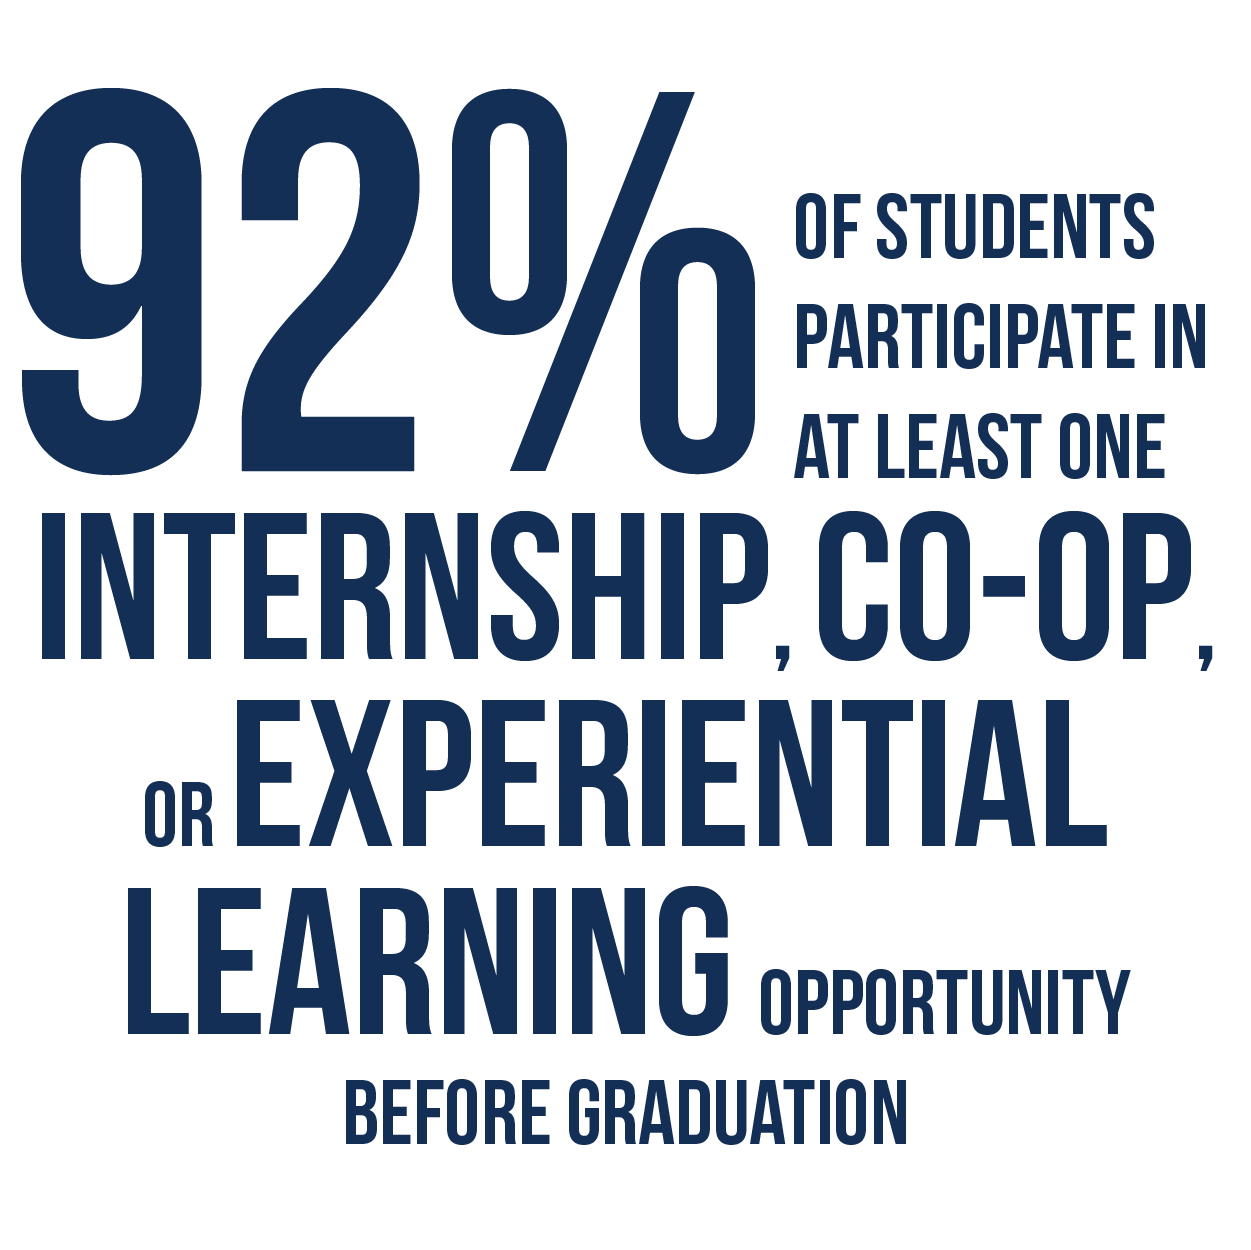 Internship, co-op, experiential learning